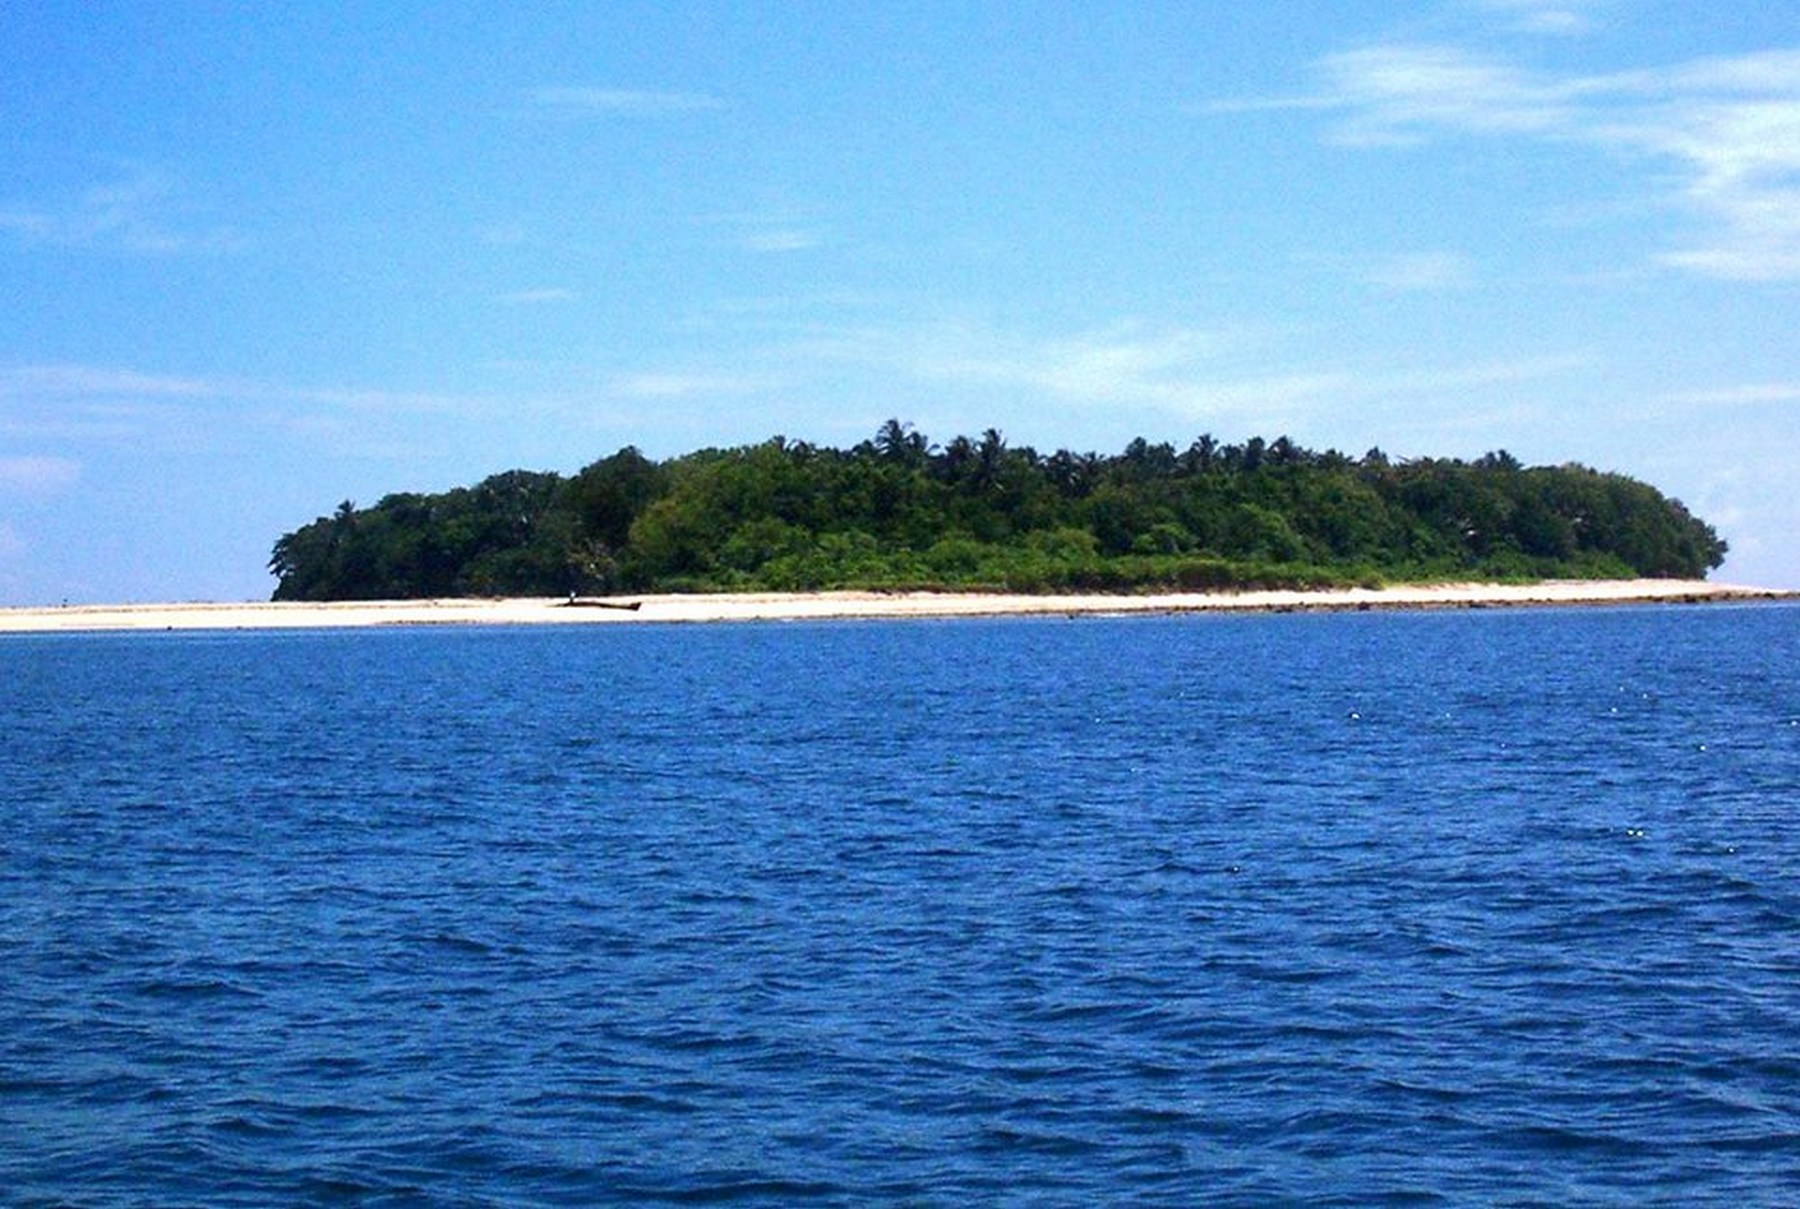 <b class="font-bara"><i class="bi bi-geo-fill h4"></i> TIPDOS ISLAND</b> <br/>Breathtaking beauty surrounded by nature forest, suitable site for tropical get-away and  perfectly made for frolicking and swimming.